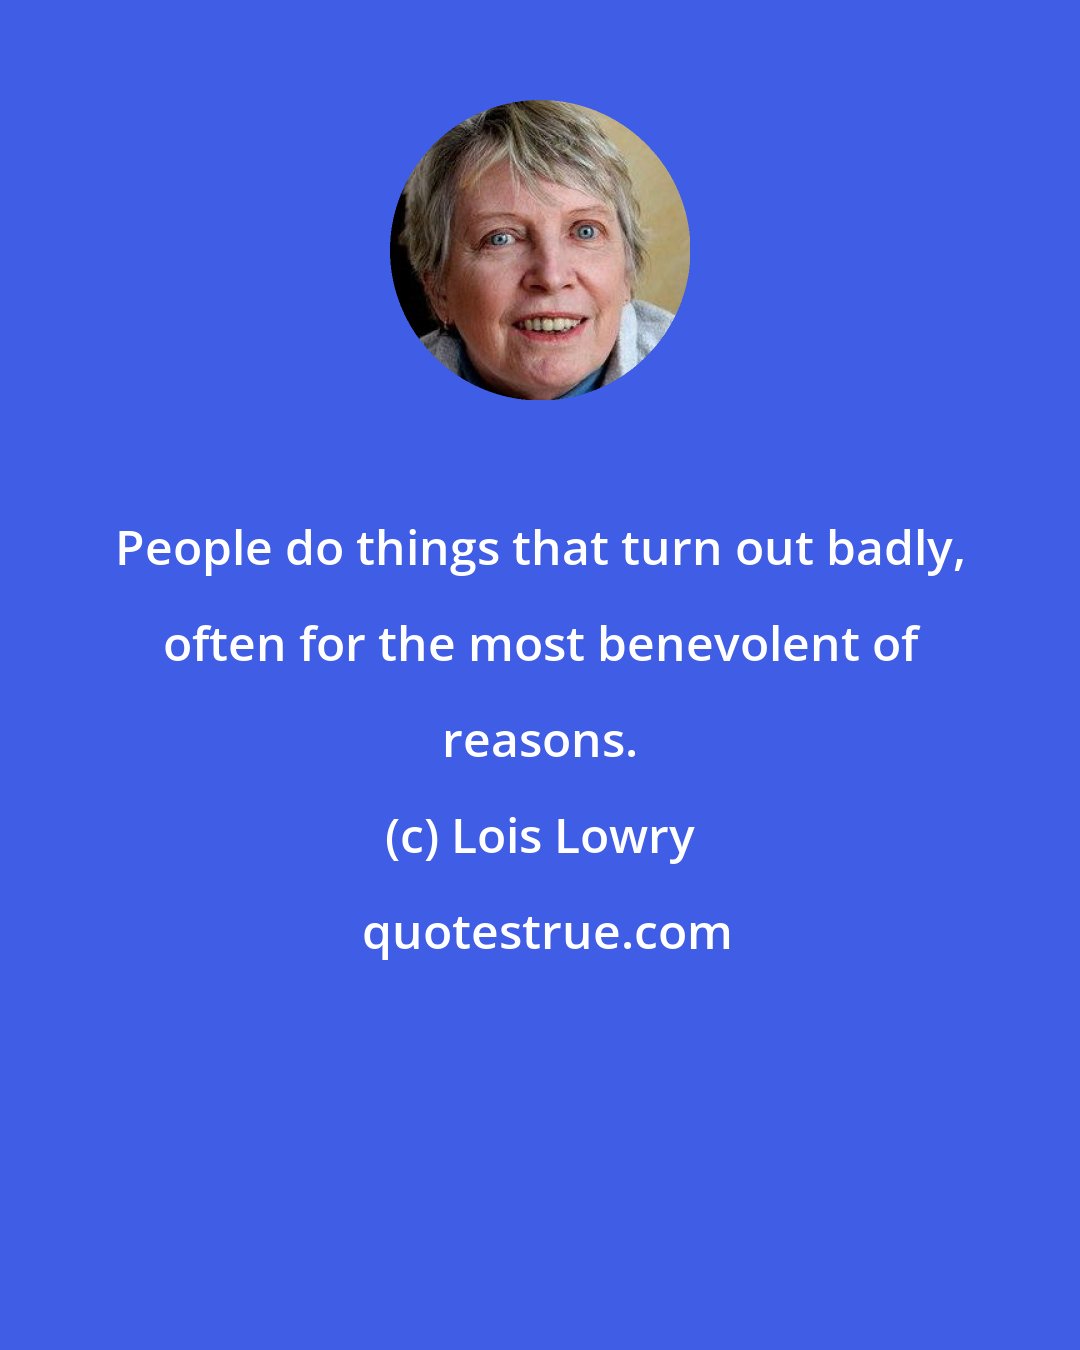 Lois Lowry: People do things that turn out badly, often for the most benevolent of reasons.